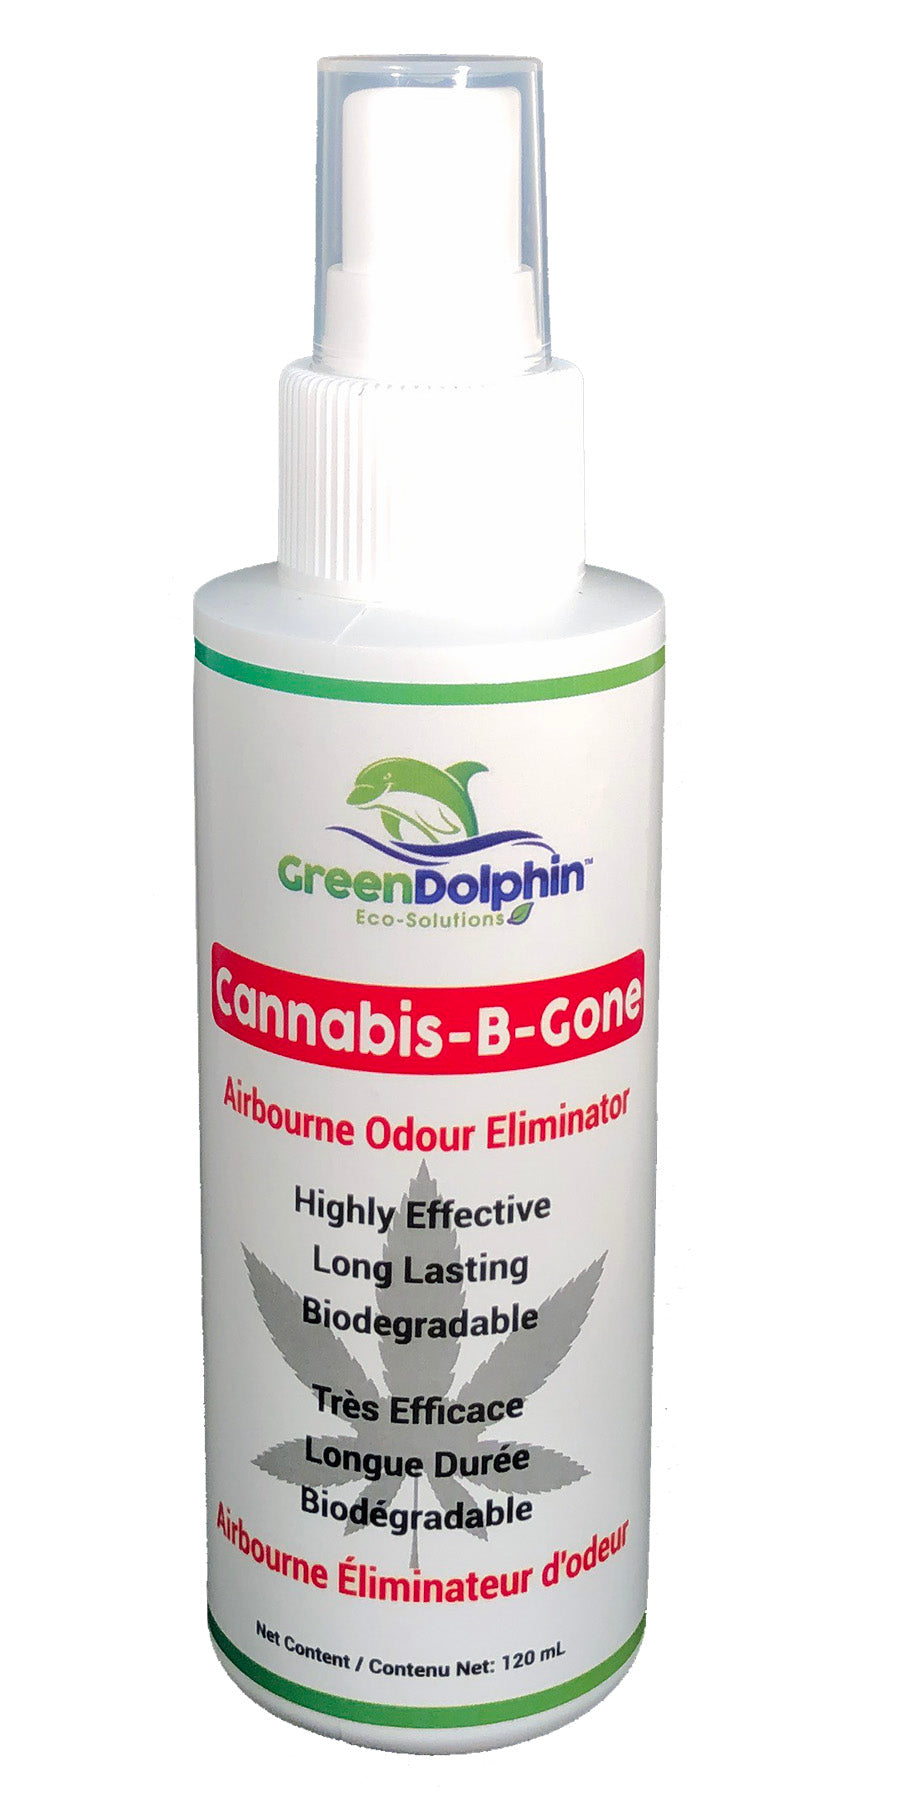 Green Dolphin Cannabis-B-Gone Airbourne & Surface Odour Eliminator